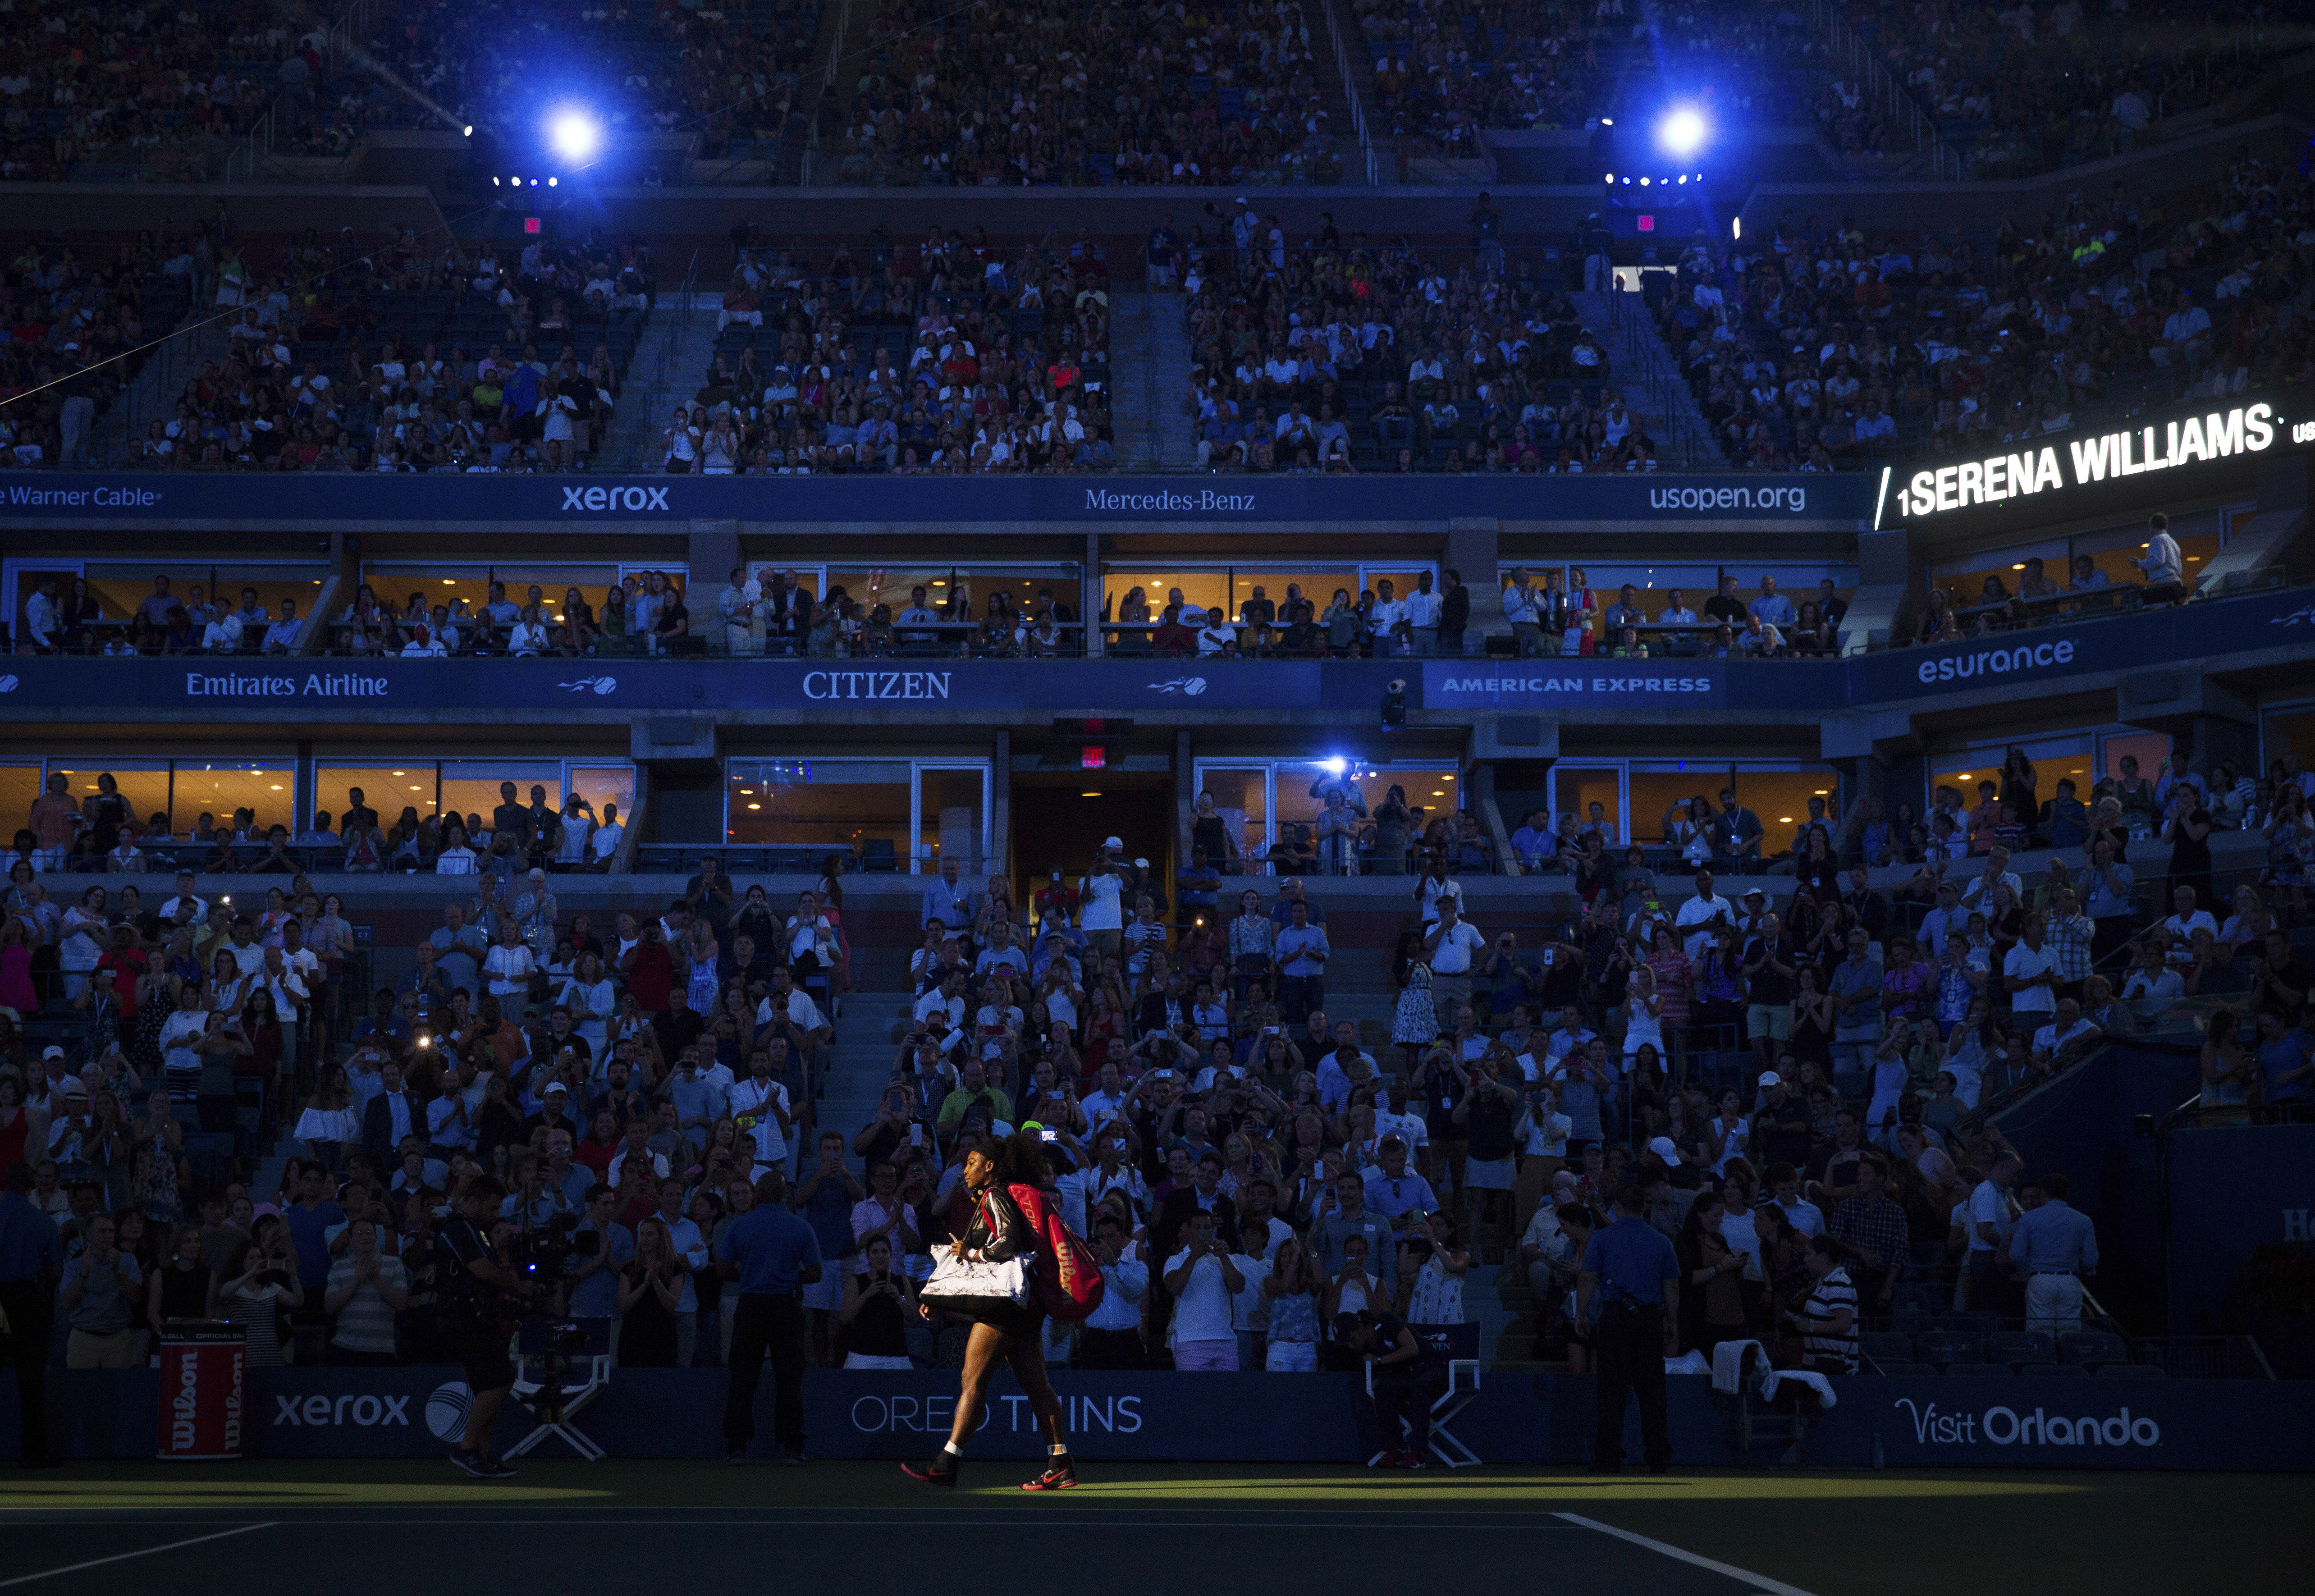 Serena Williams takes the court at the U.S. Open for her first match on Aug. 31, 2015 in New York.